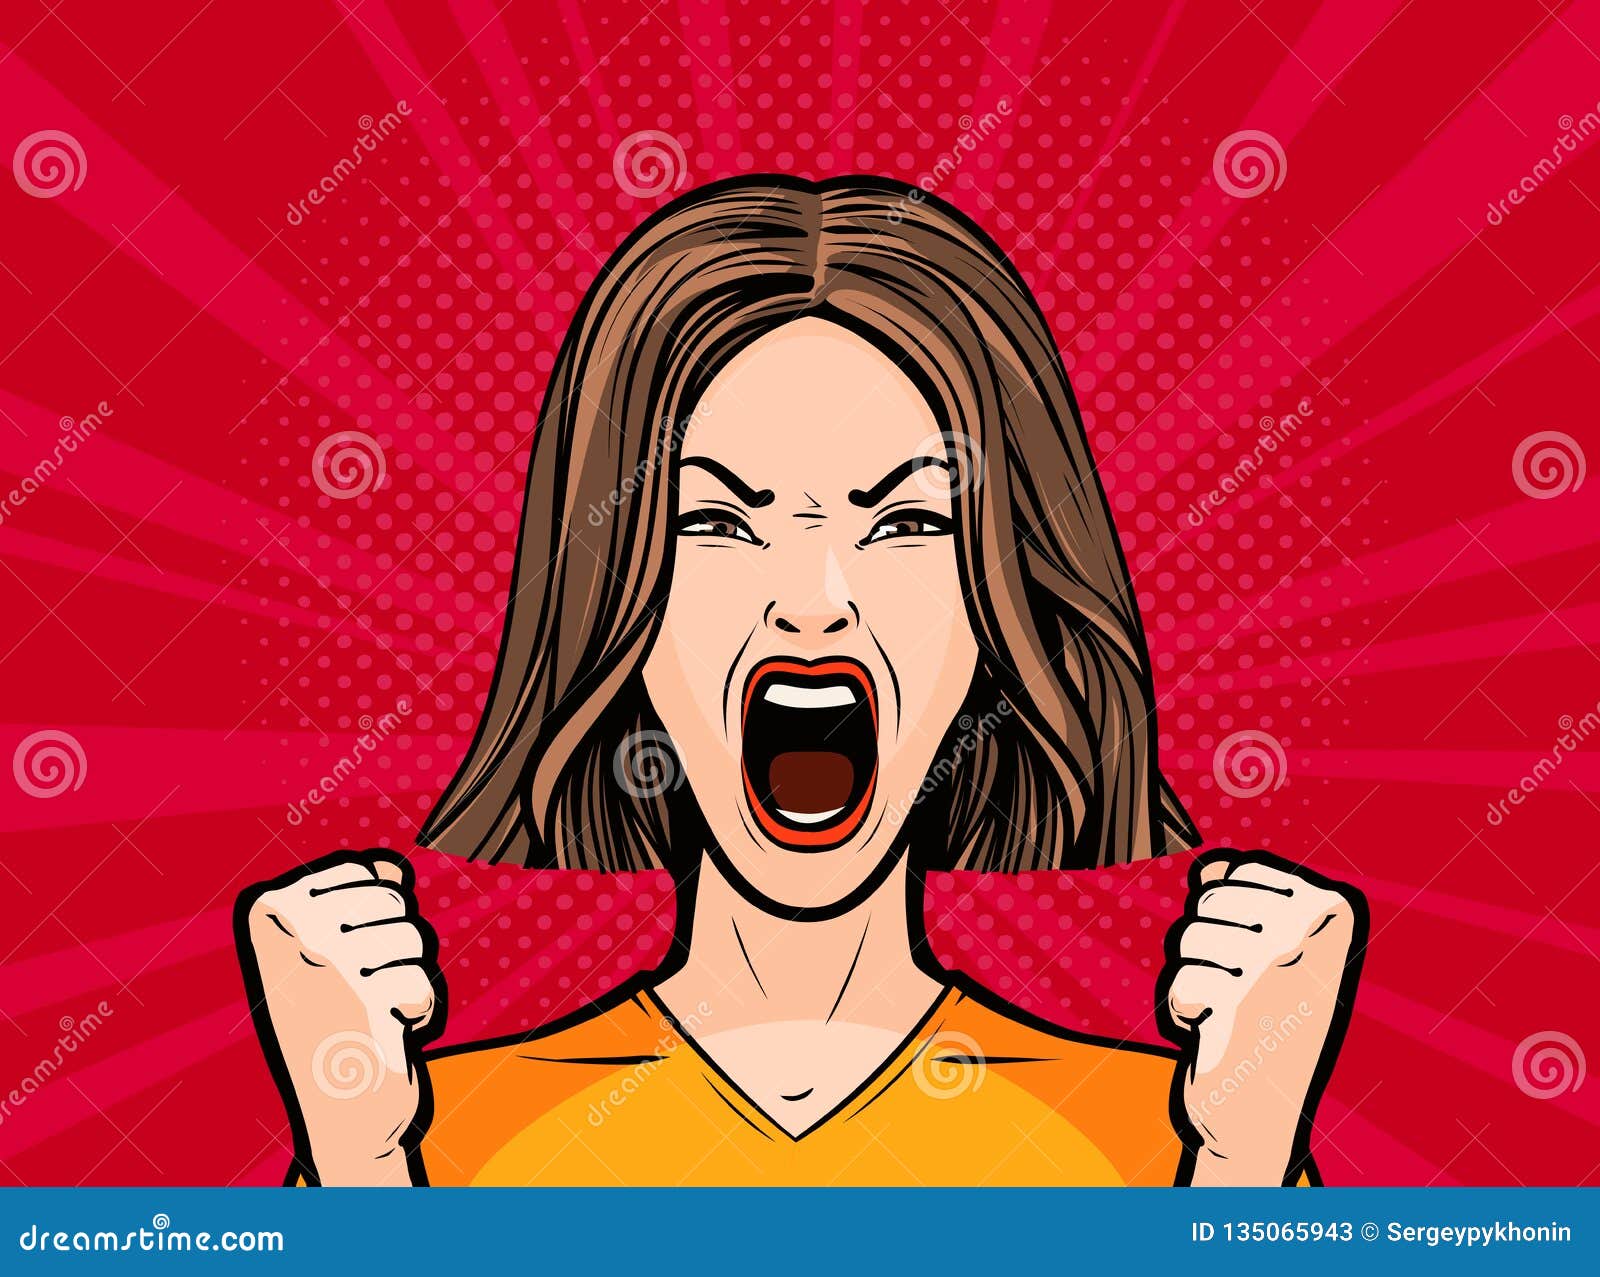 girl or young woman screaming out loud. pop art retro comic style. cartoon  